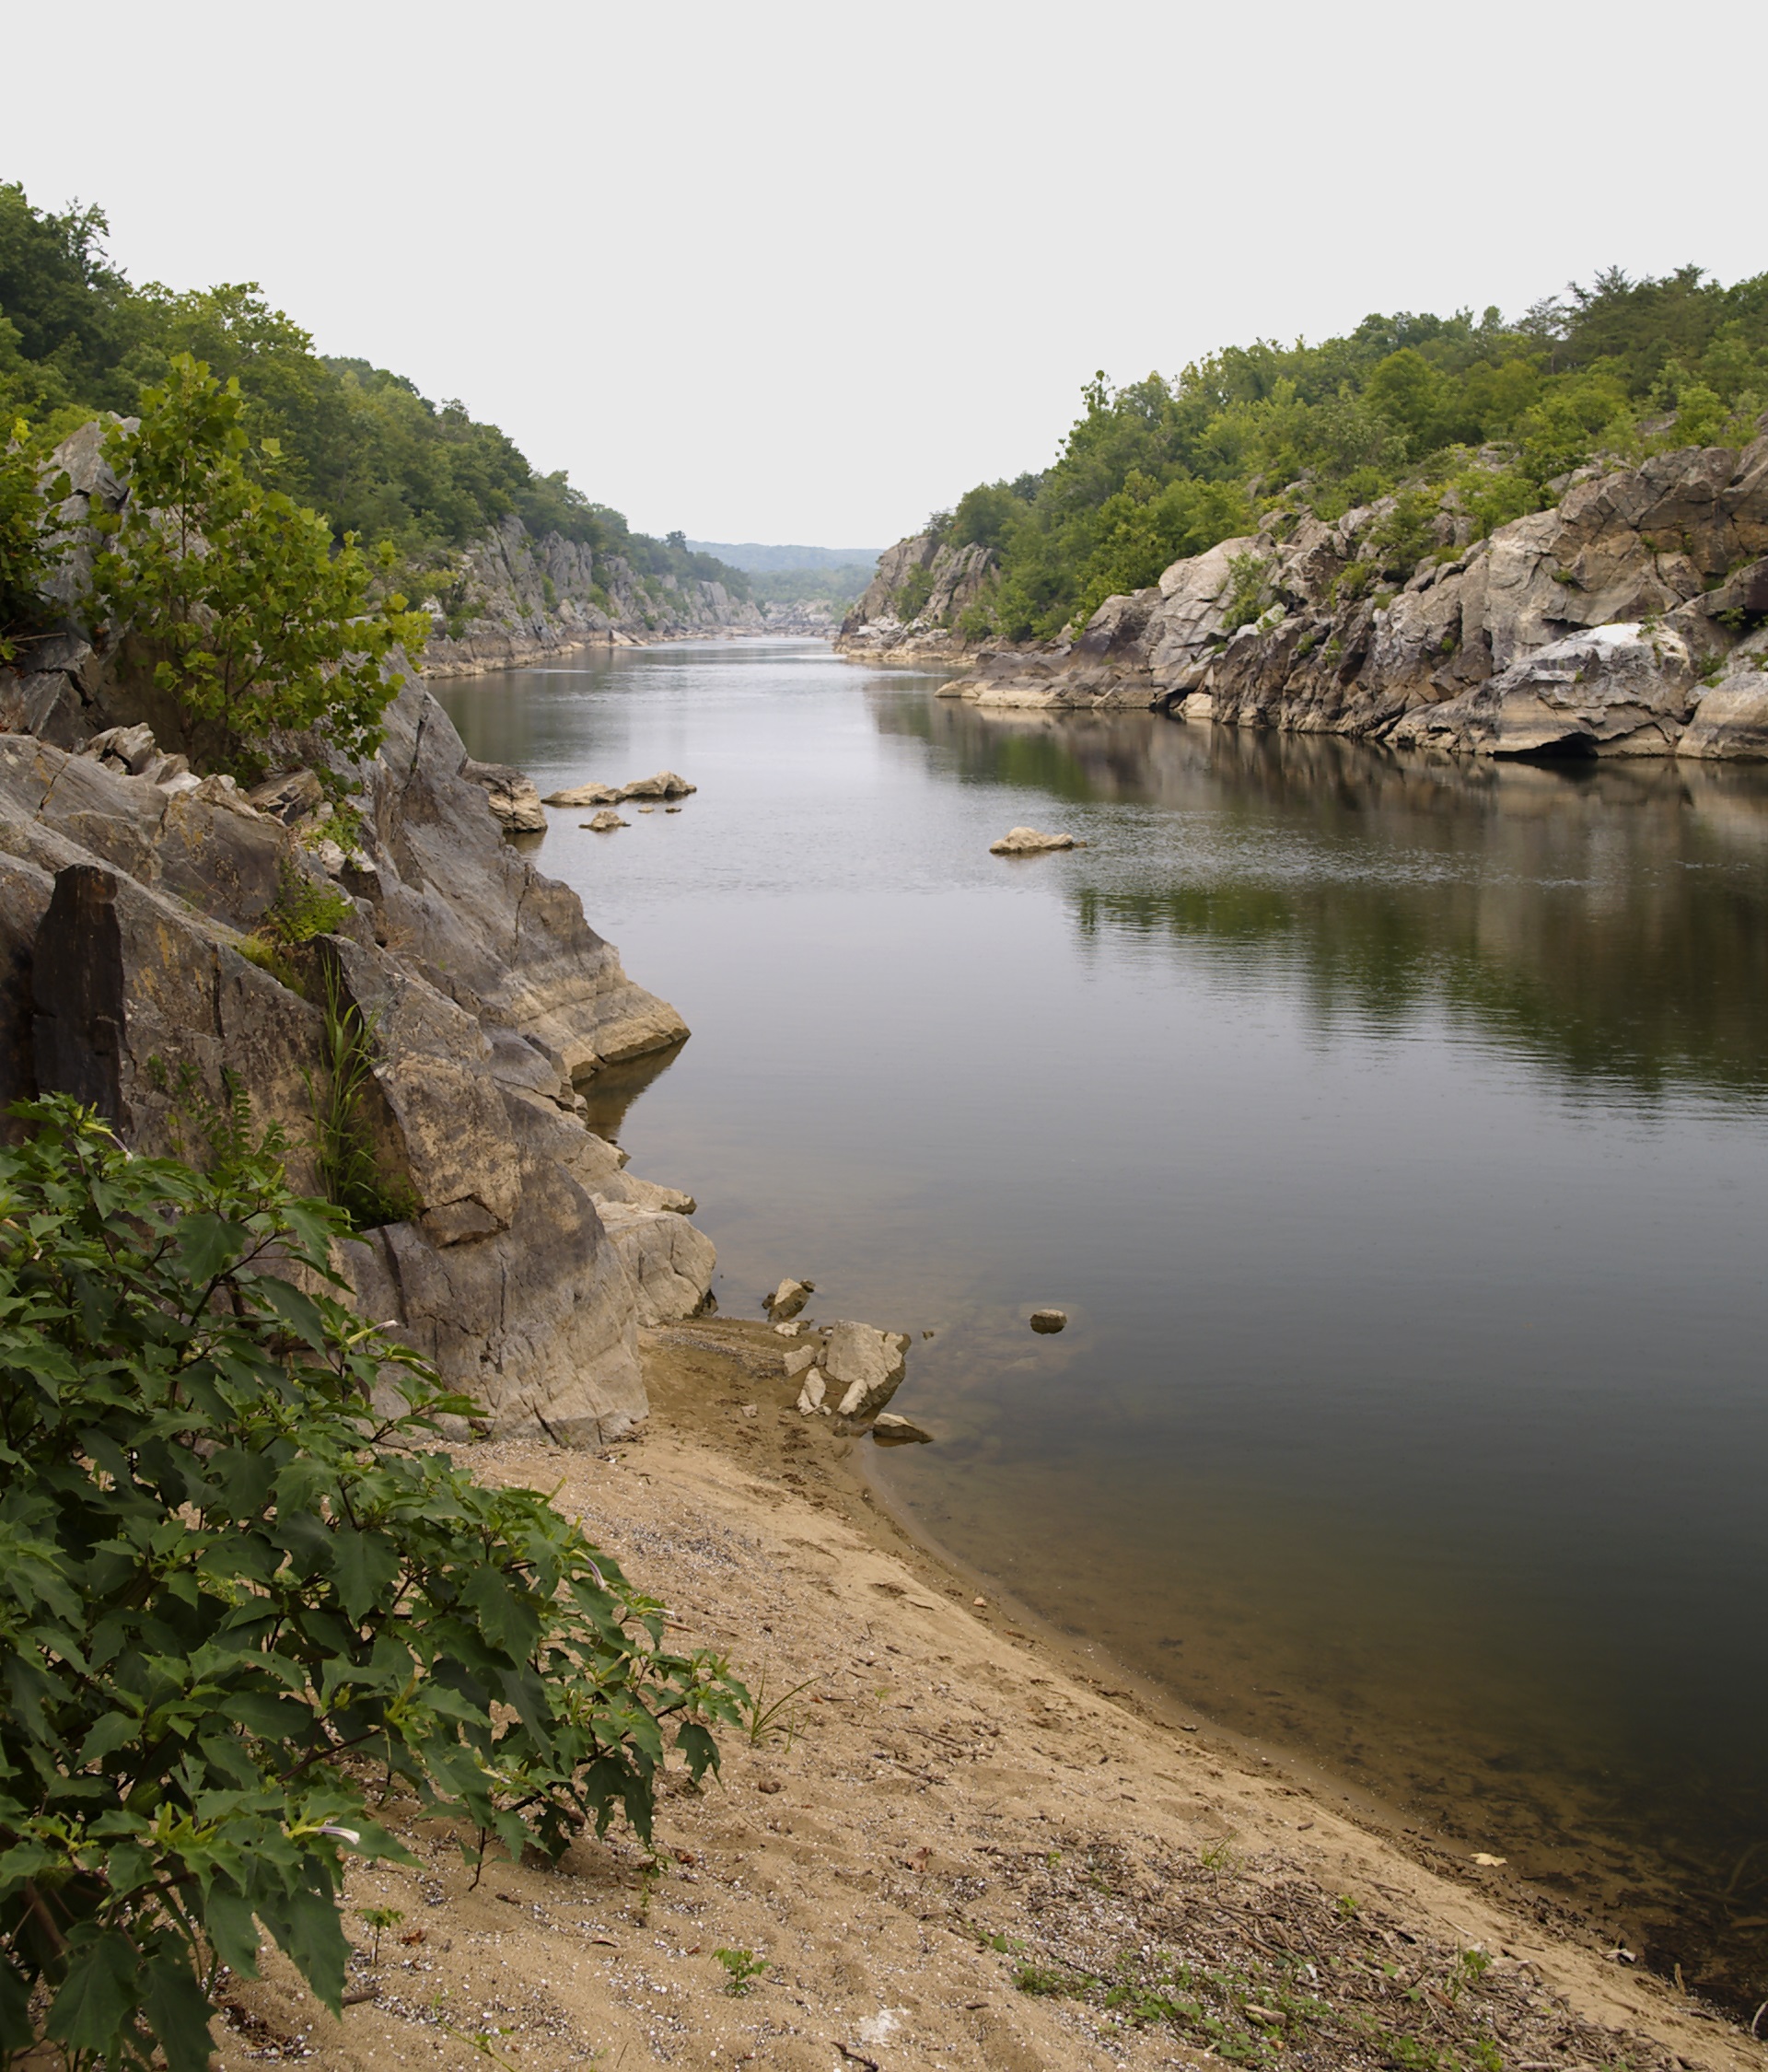 A calm river between two rocky edges. A sandy beach is seen in the foreground.